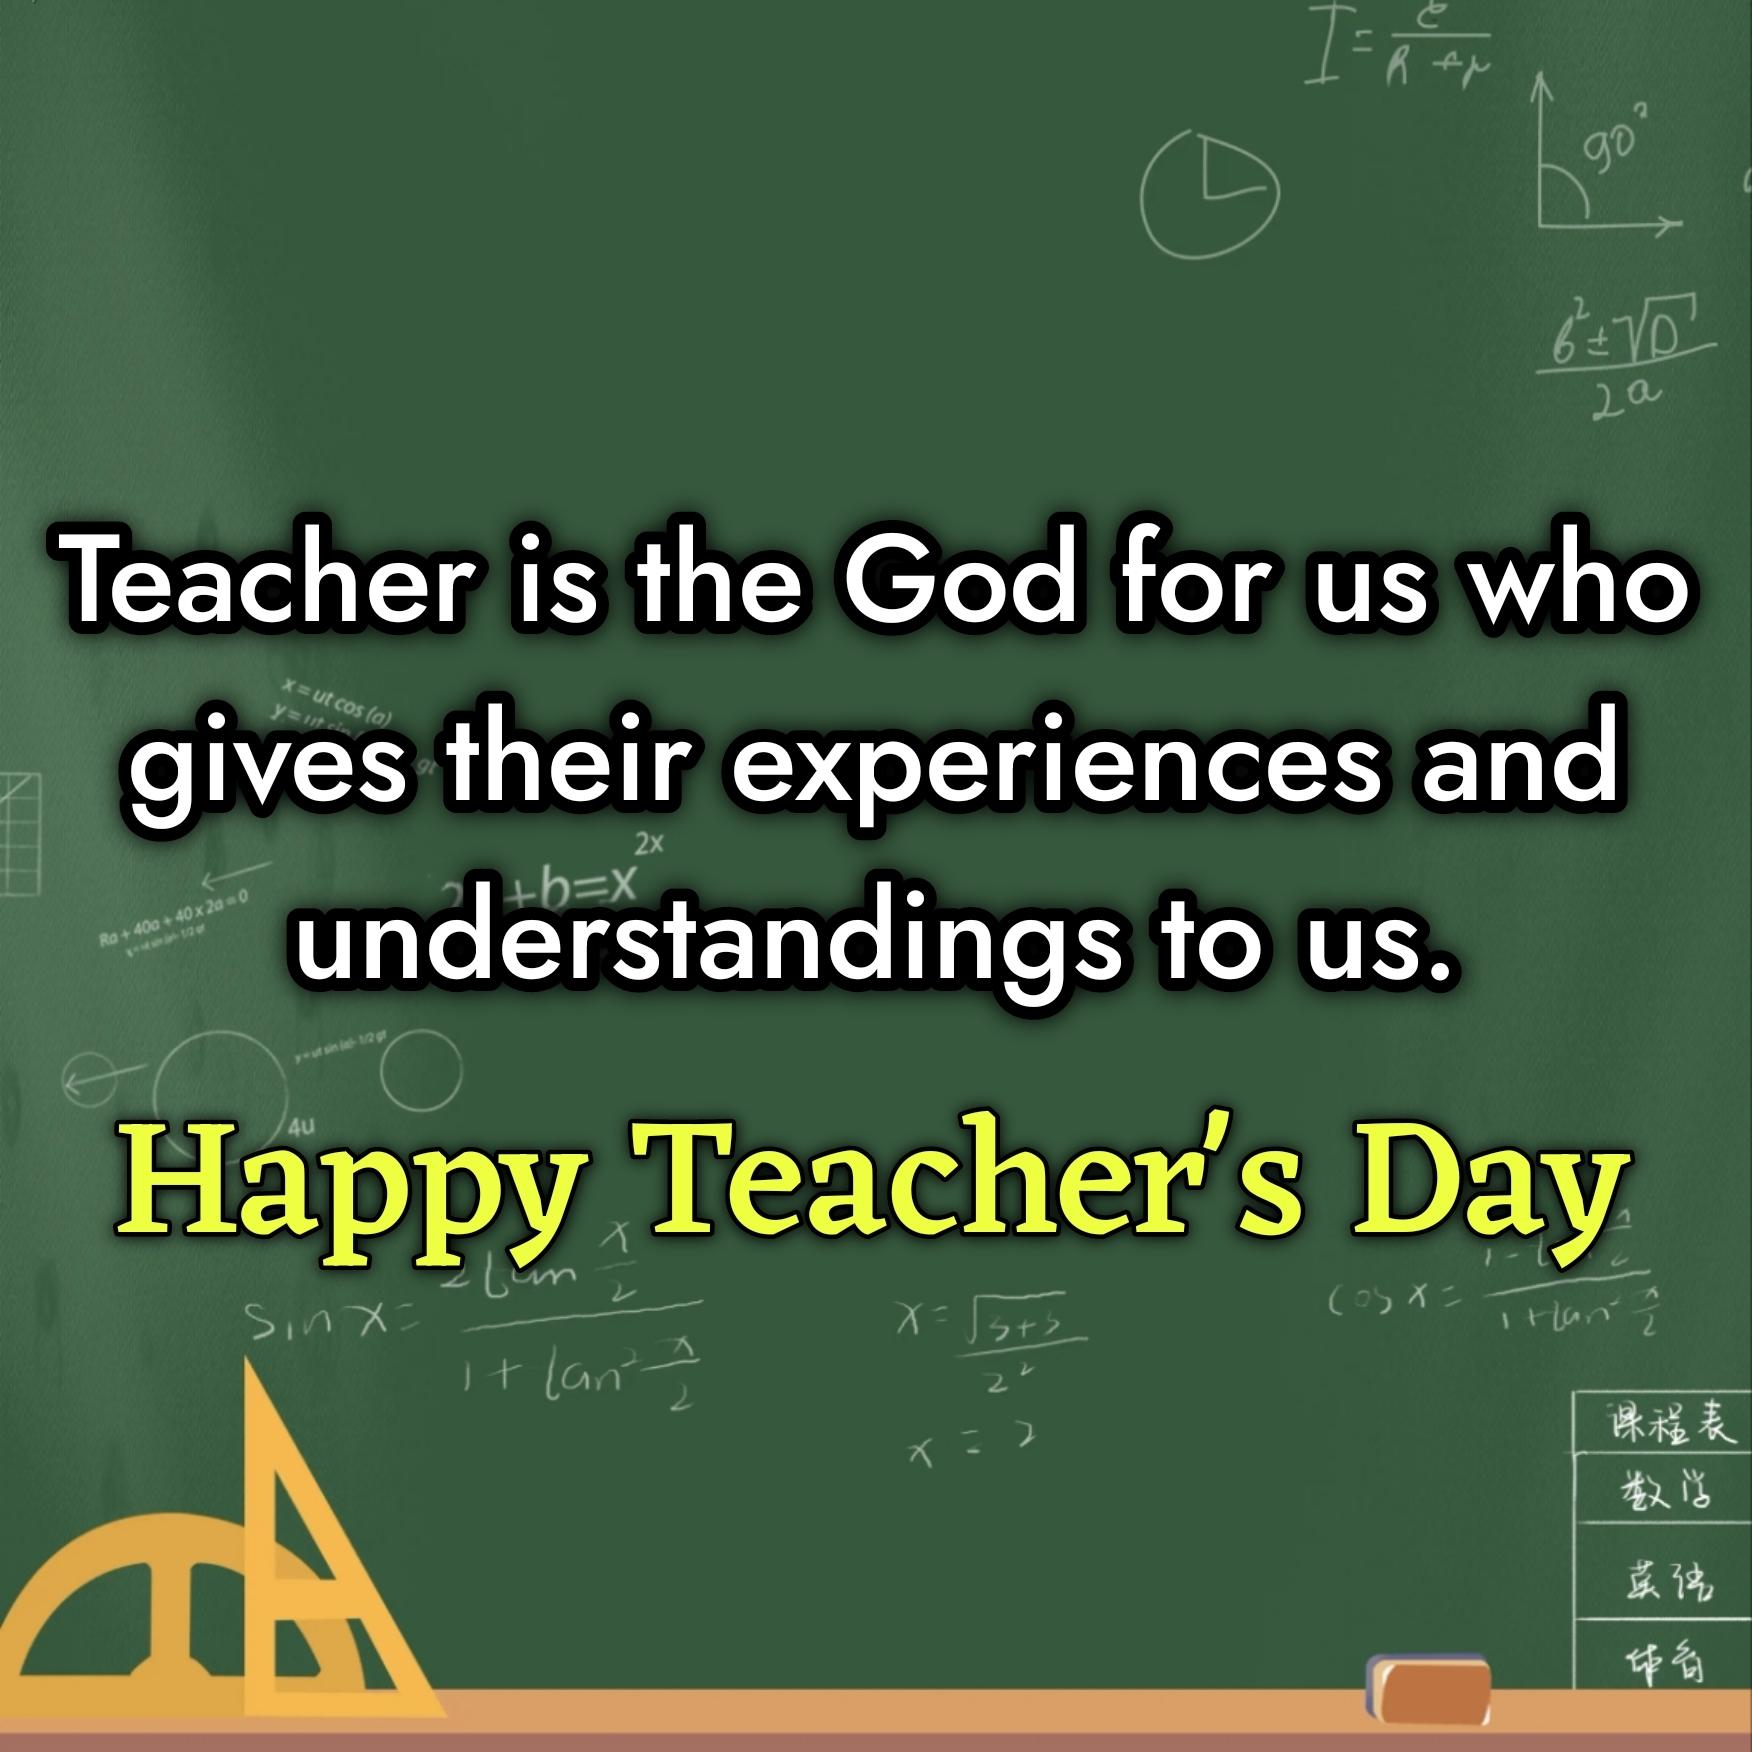 Teacher is the God for us who gives their experiences